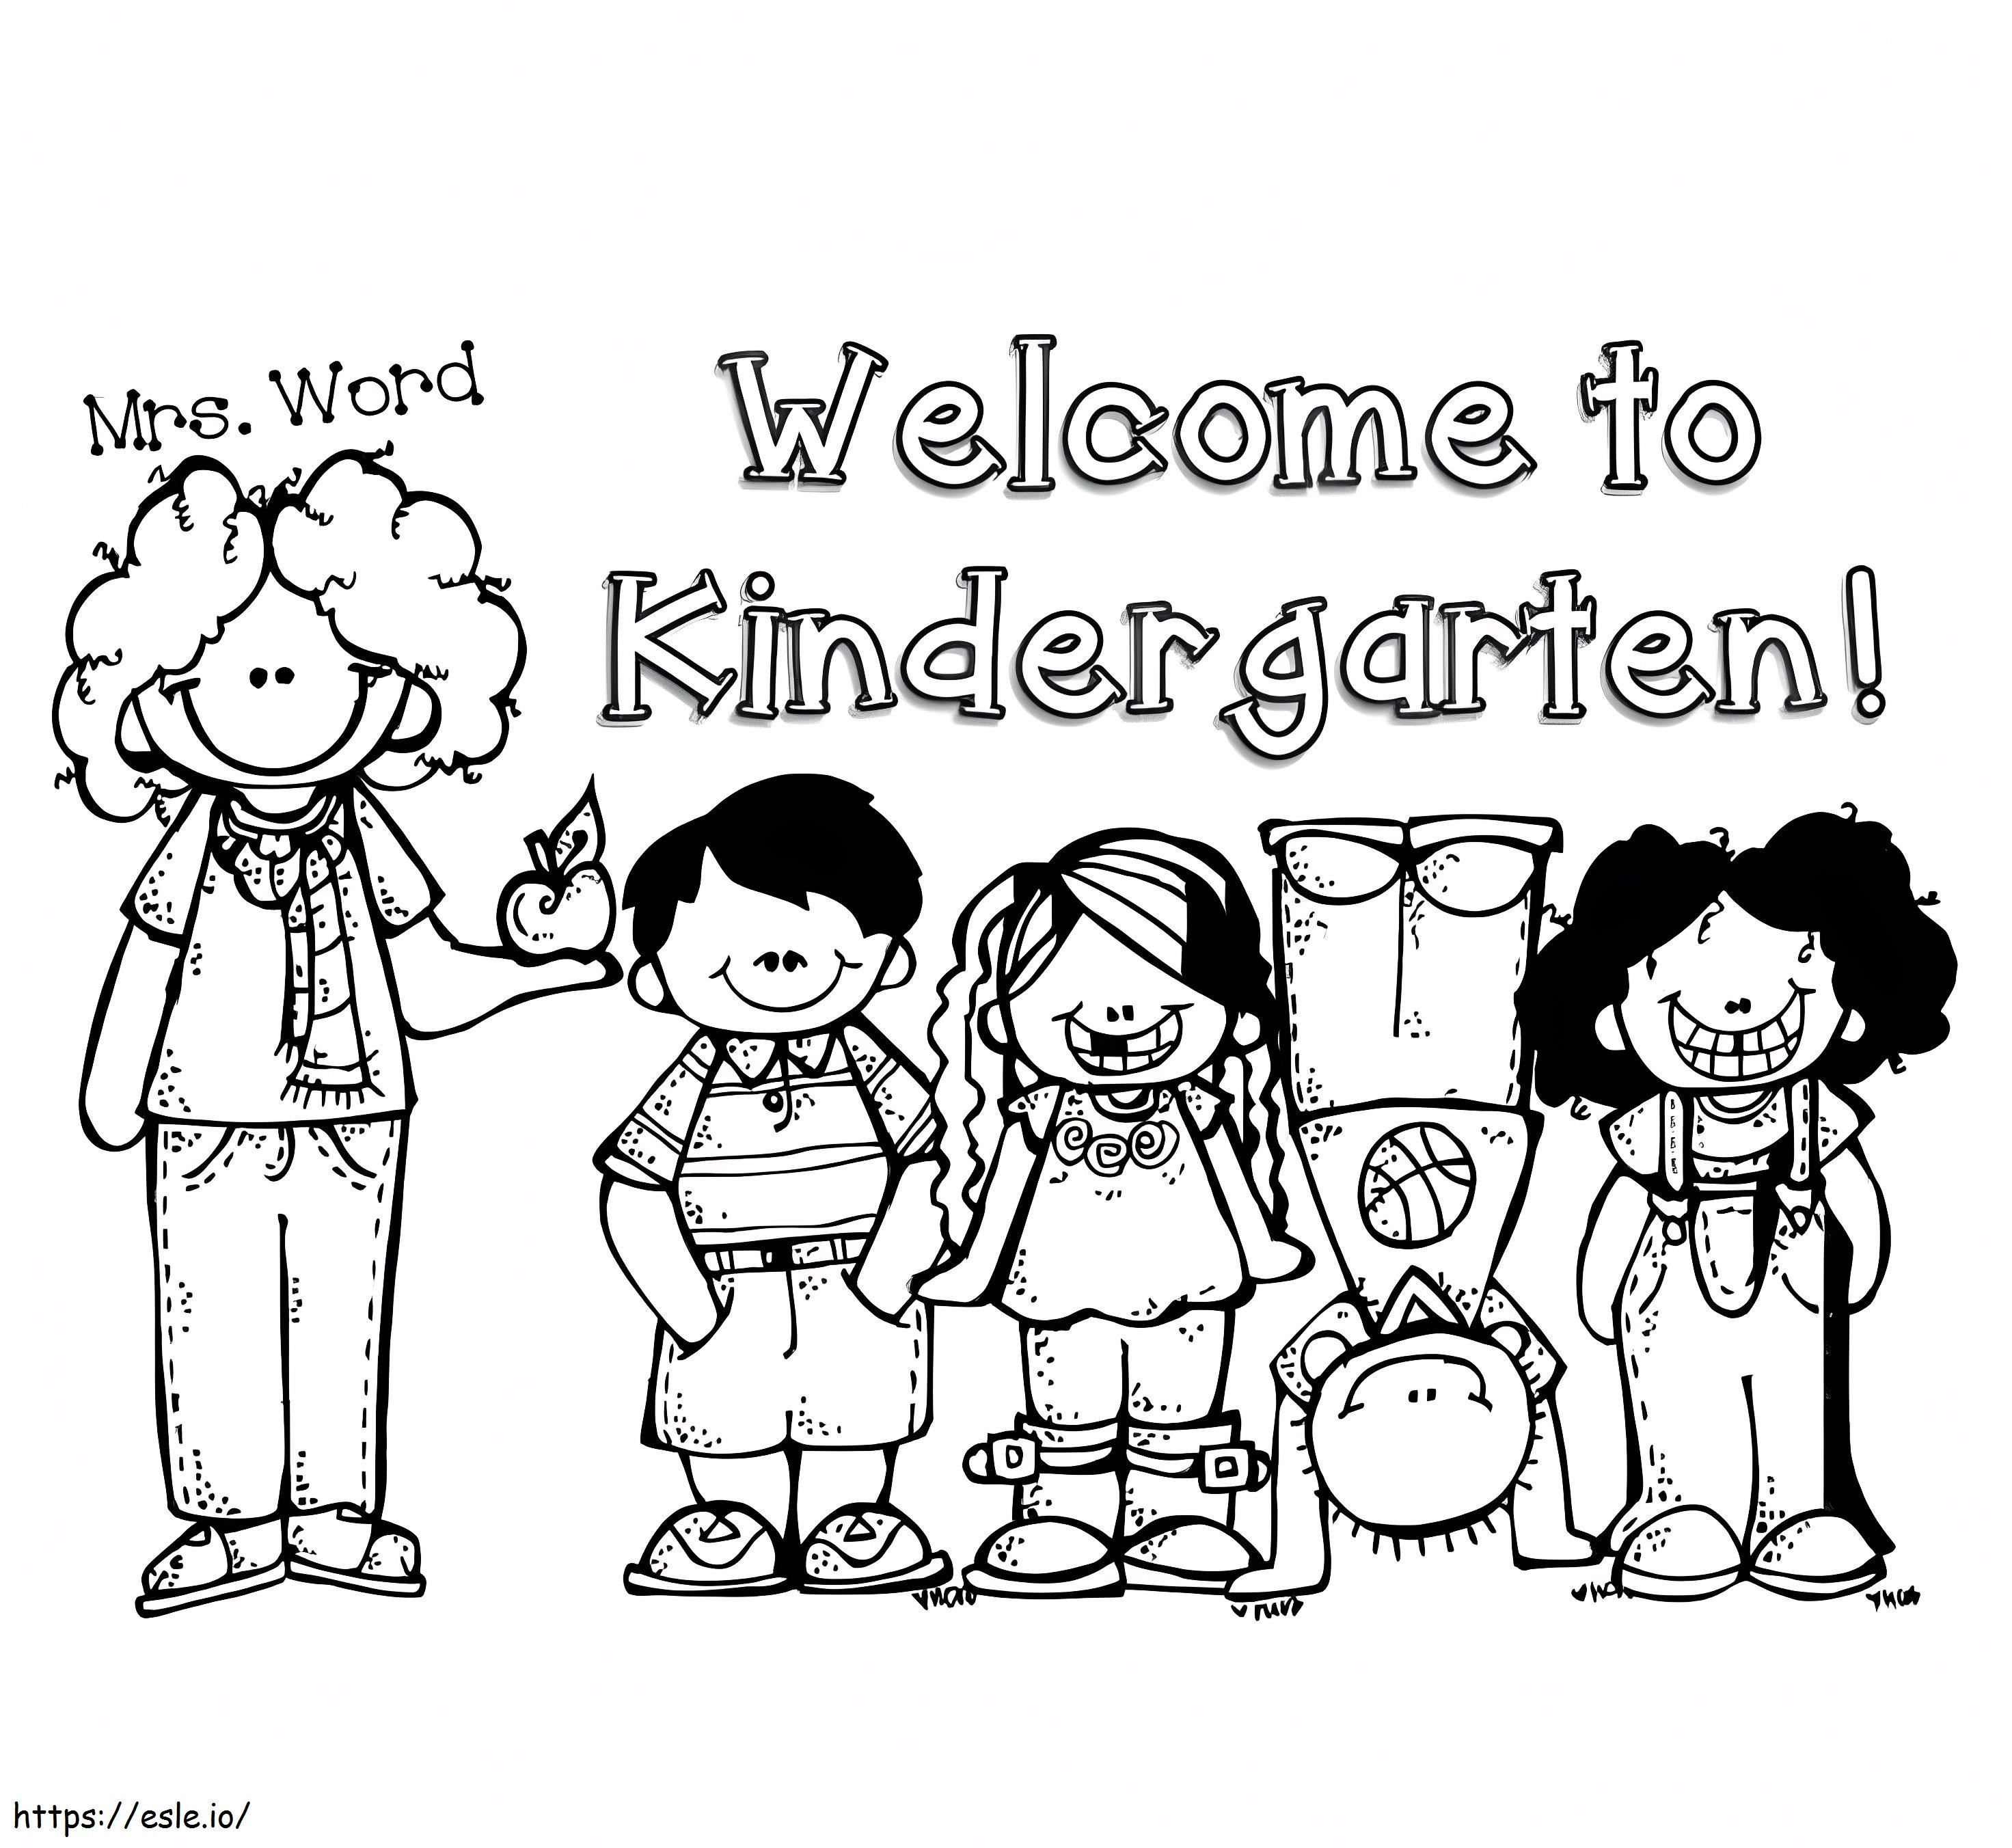 Welcome To Kindergarten coloring page